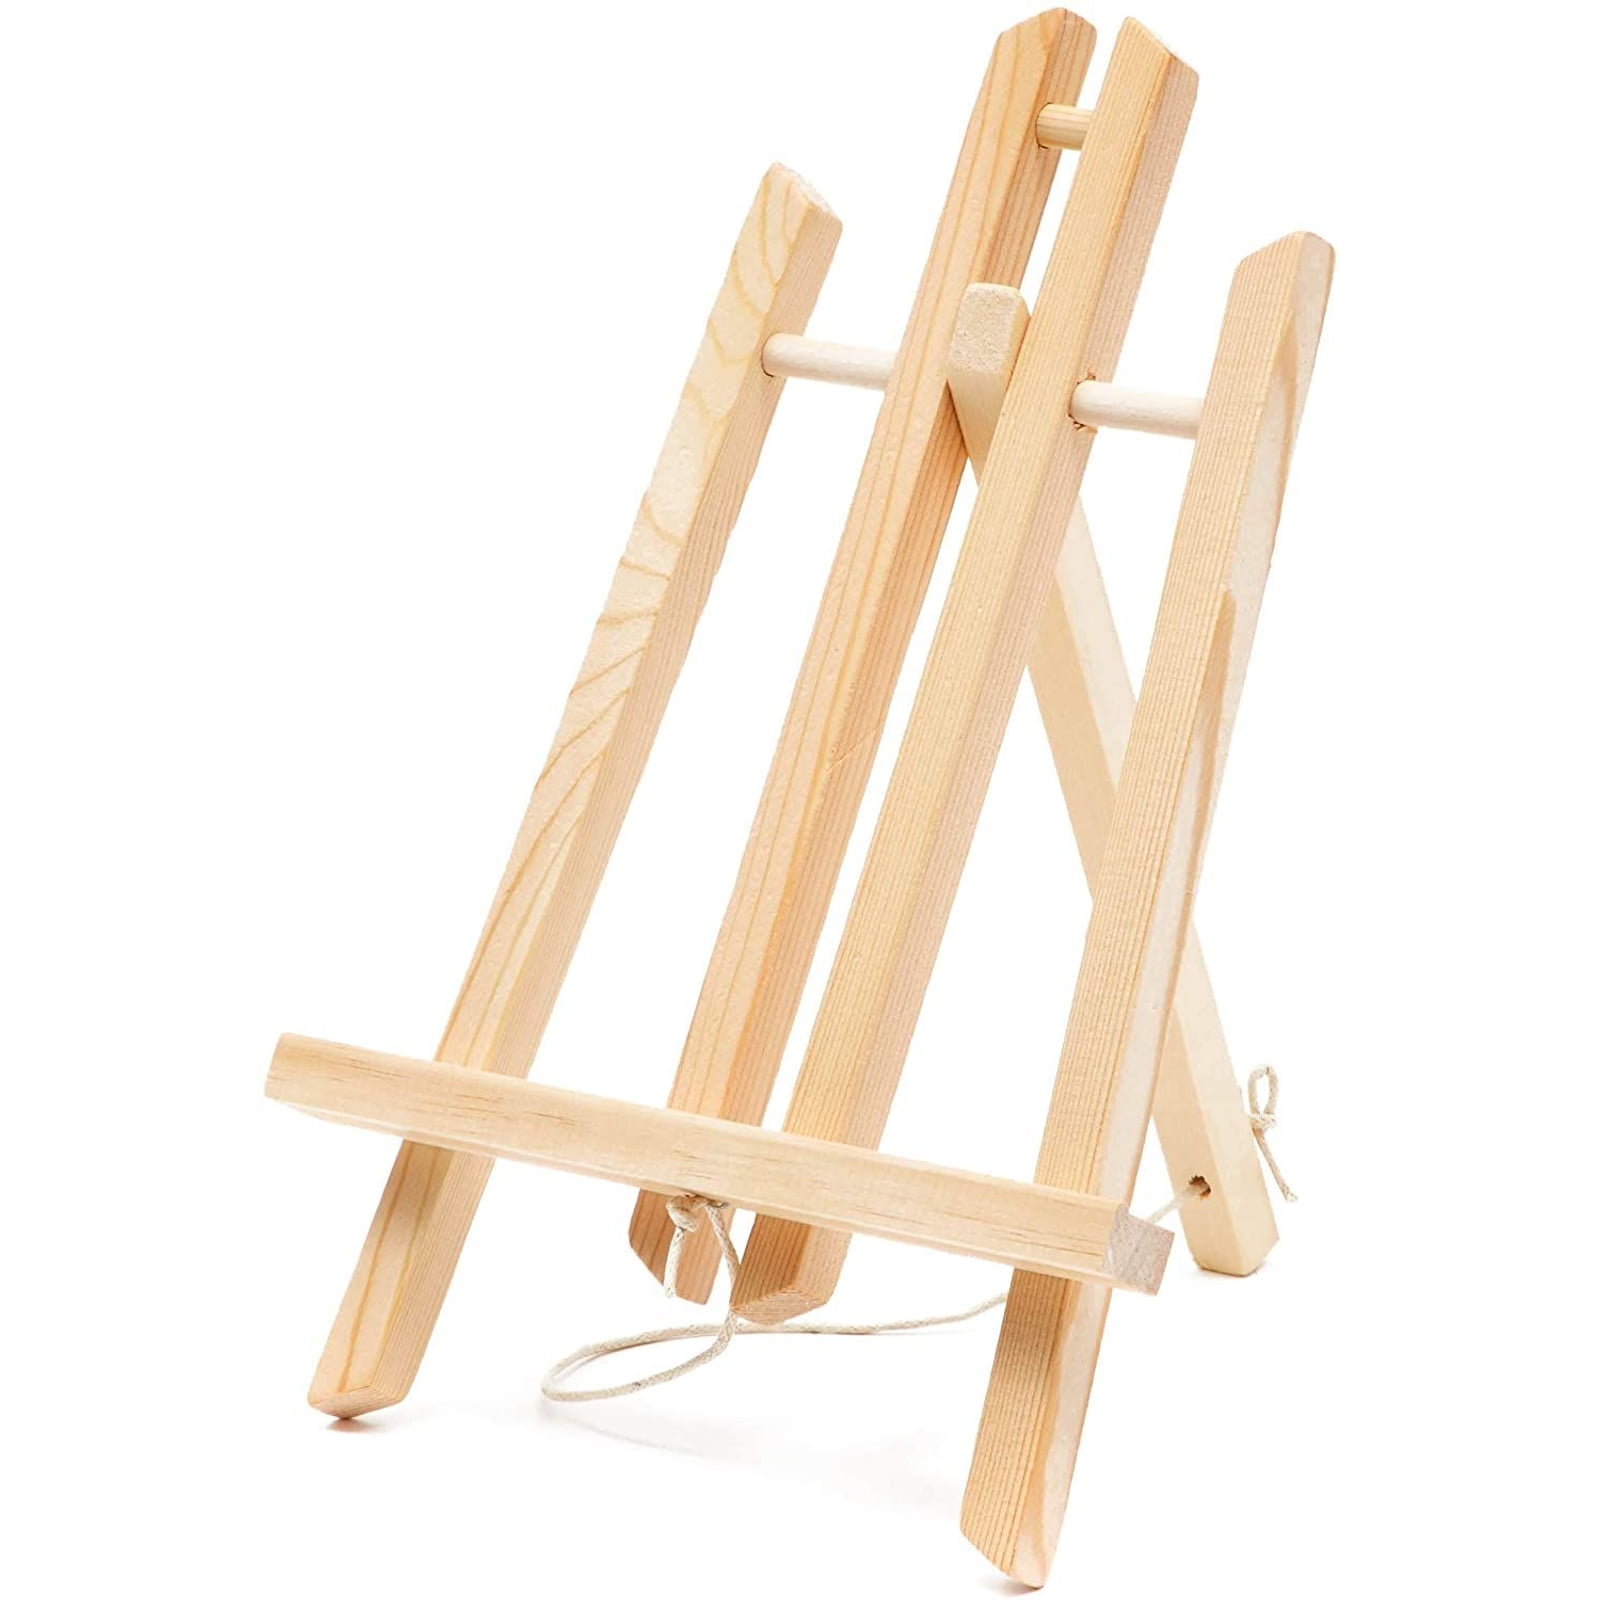 1-10X Mini Artist Wooden Table Top Easel Wedding Picture Stand Display Tripod 